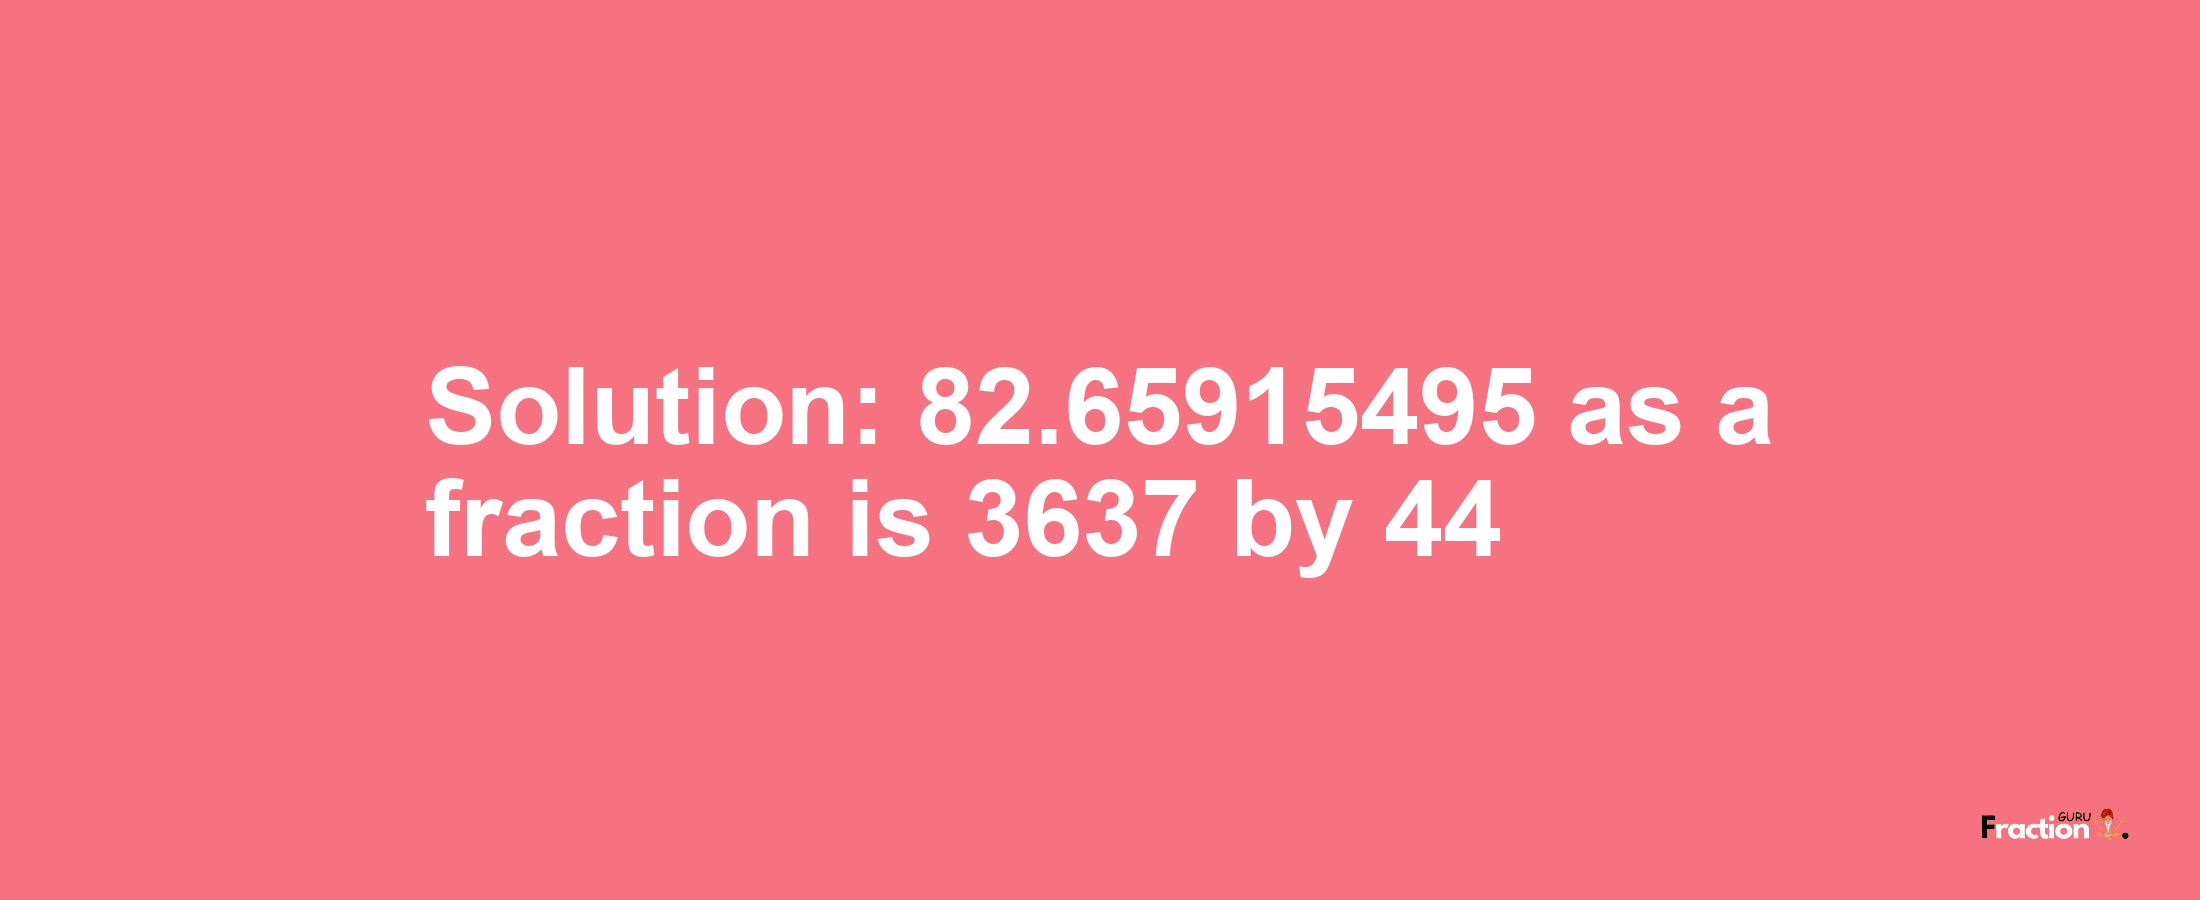 Solution:82.65915495 as a fraction is 3637/44